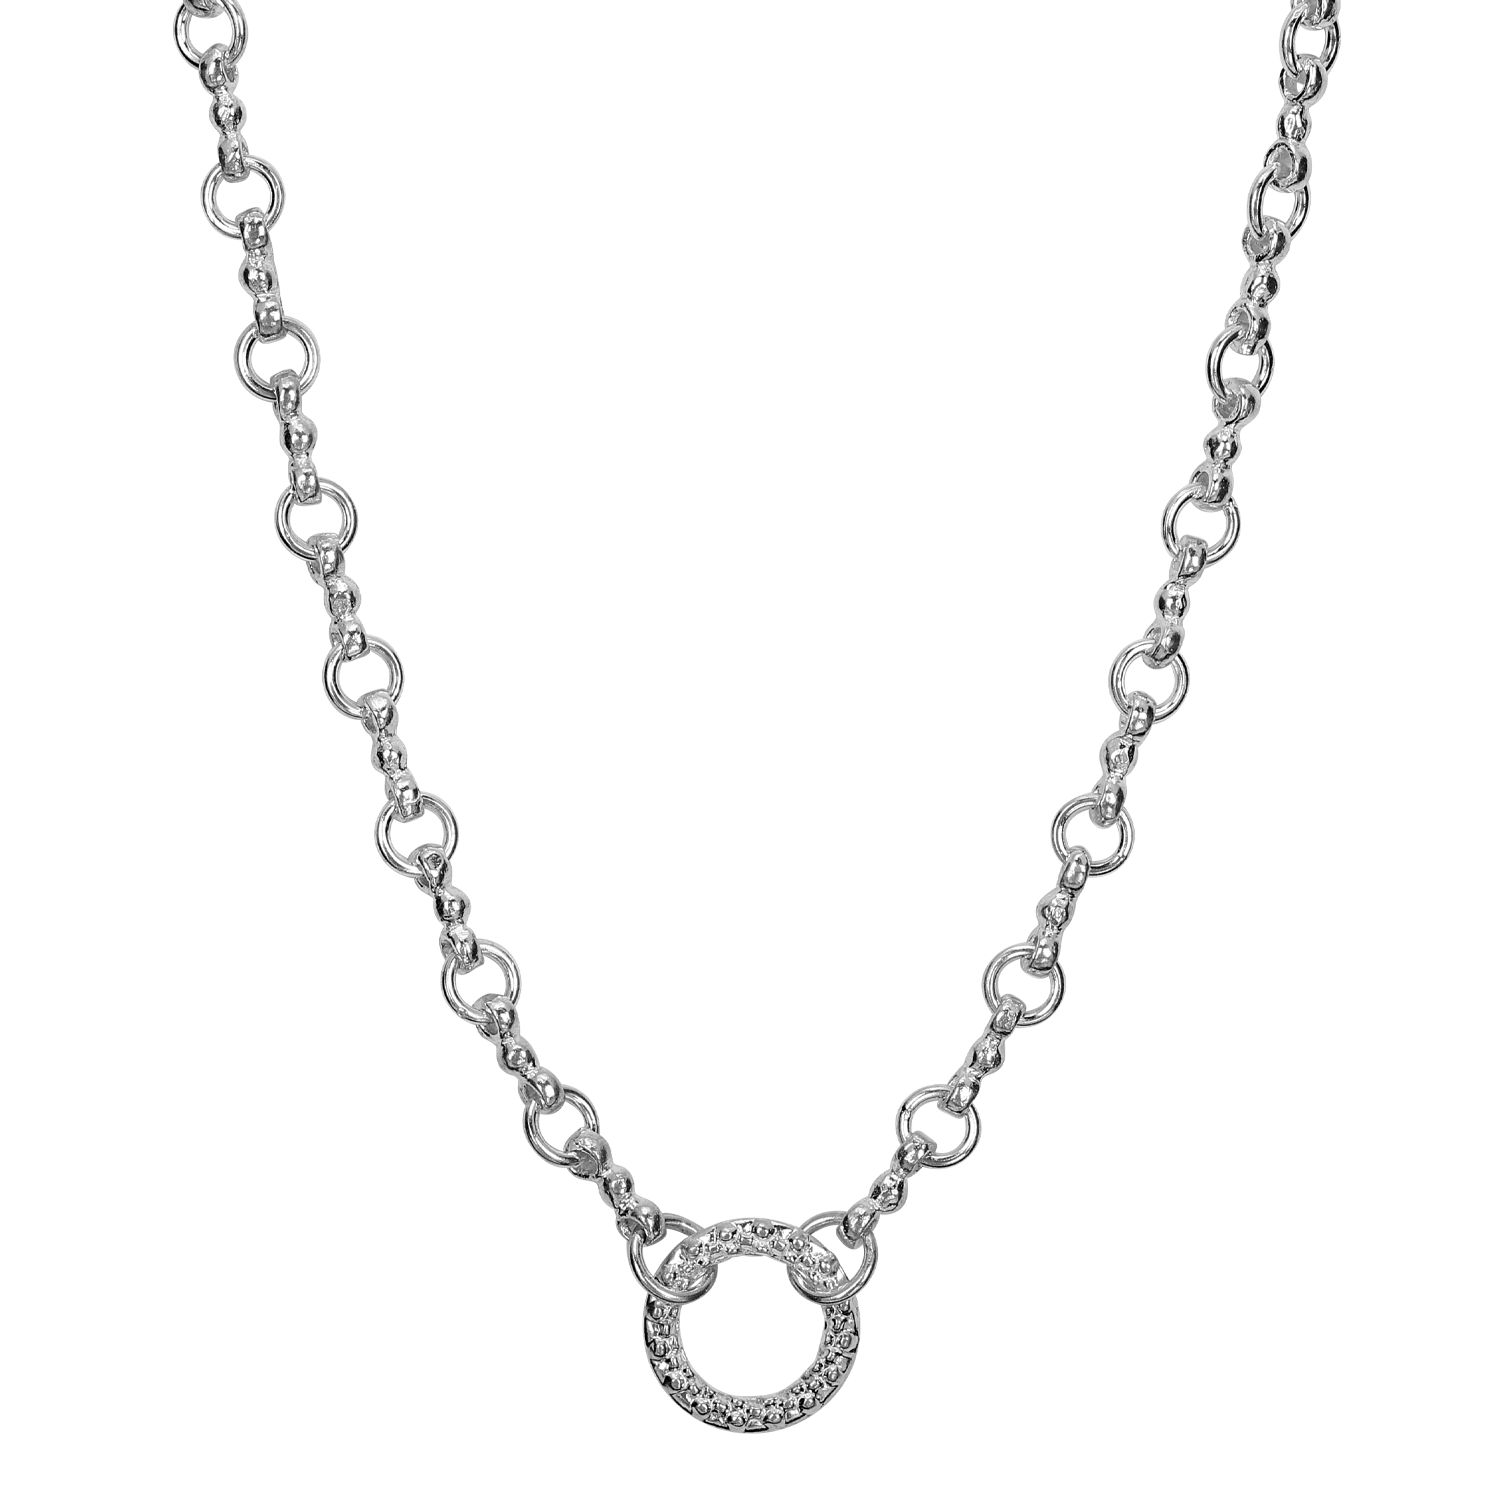 Vahan Sterling Silver Necklace Javeri Jewelers Inc Frisco, TX